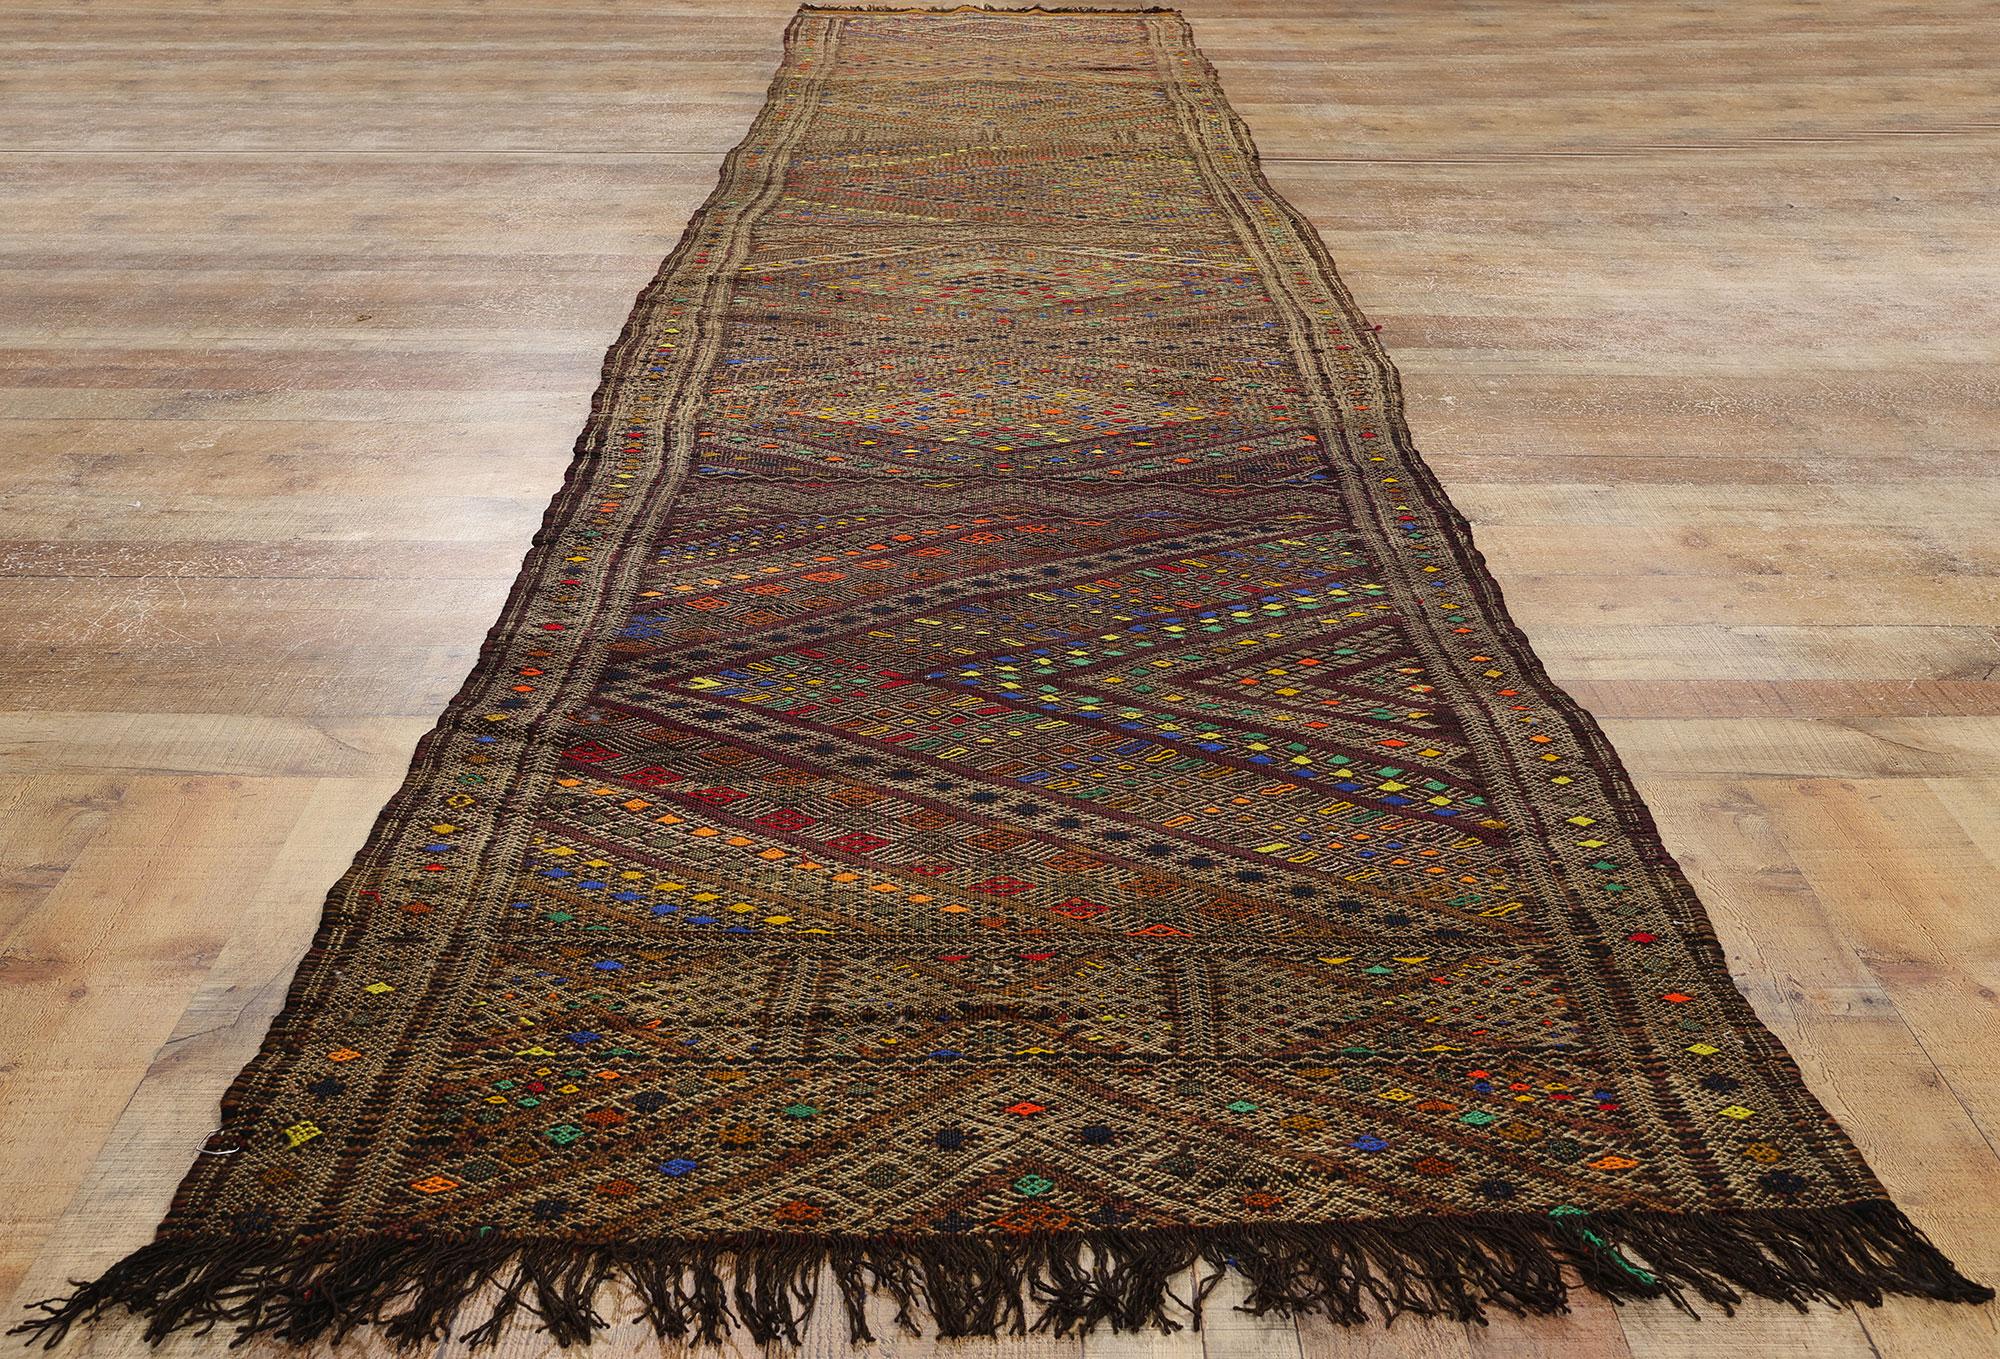 Vintage Zemmour Moroccan Hanbel Rug Kilim Runner In Good Condition For Sale In Dallas, TX